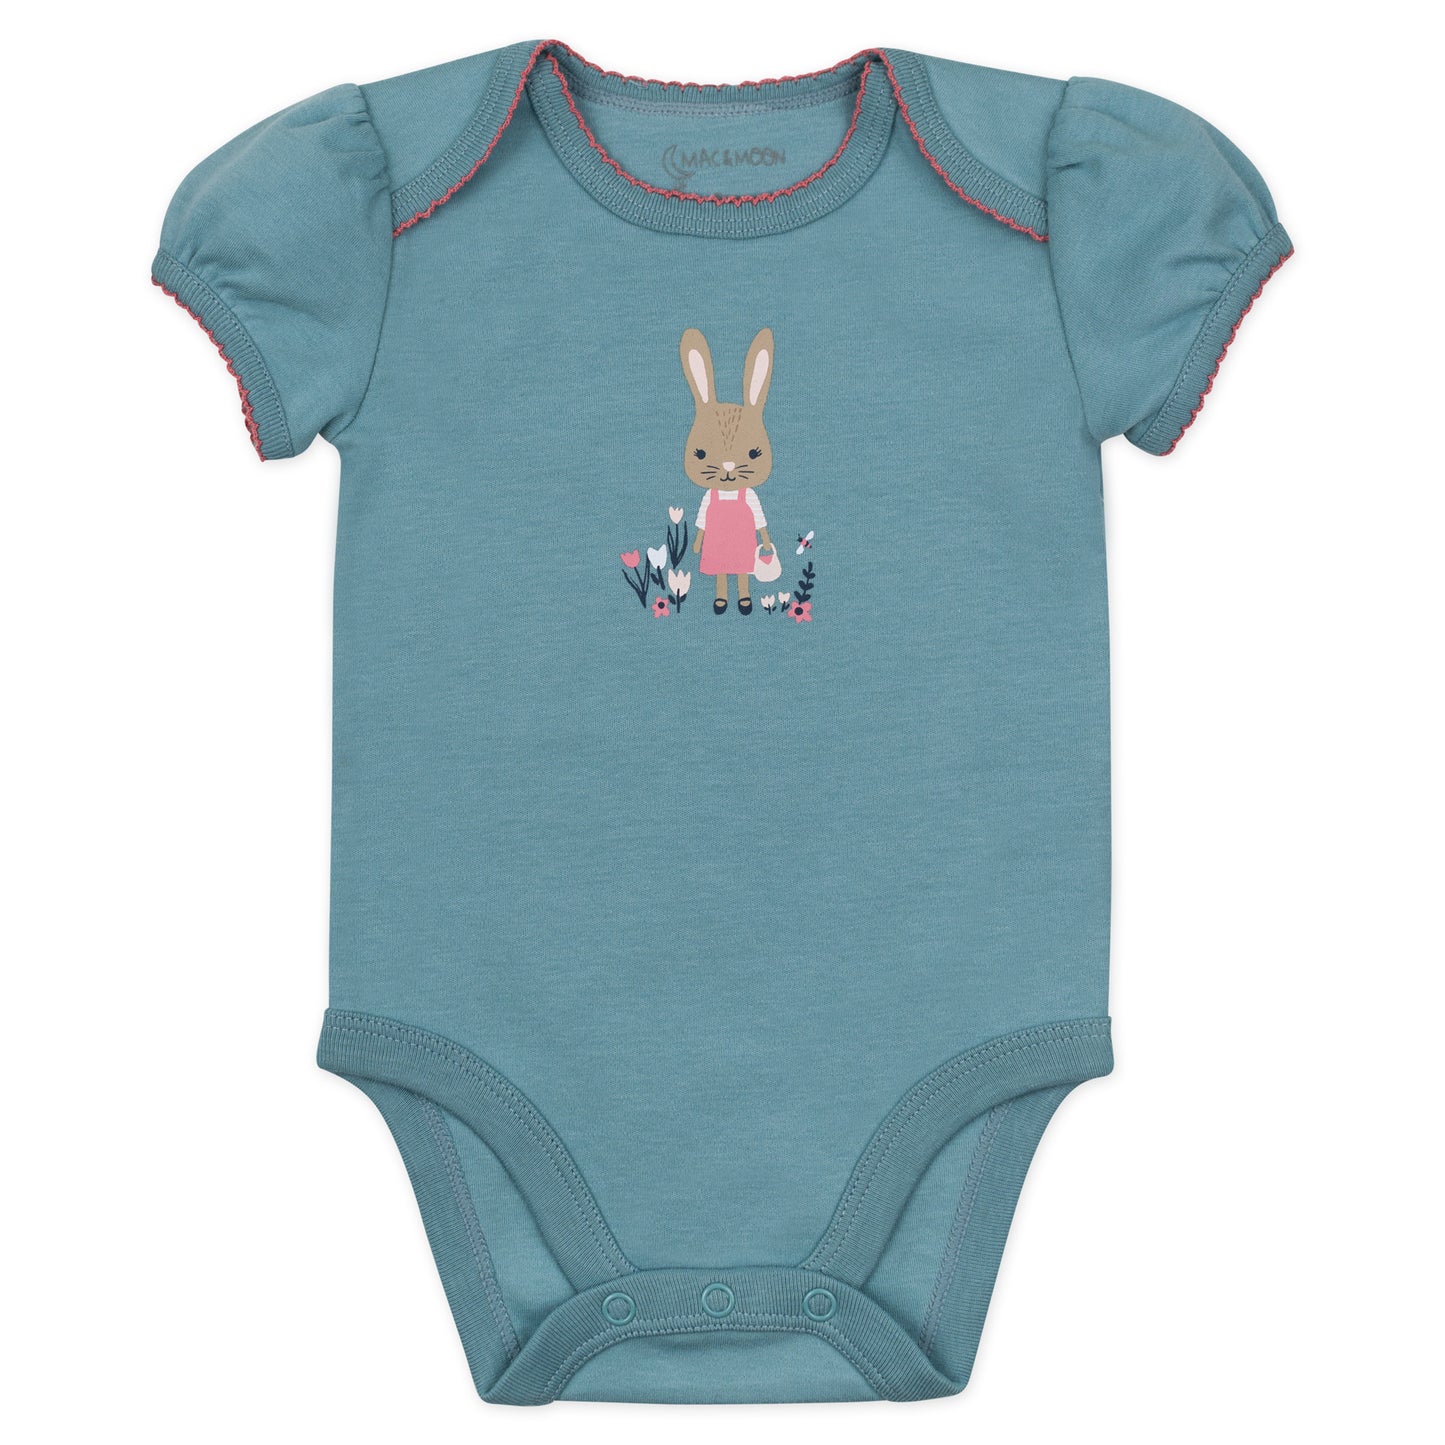 3-Pack Organic Cotton Short Sleeve Bodysuit in Bunny Floral Print